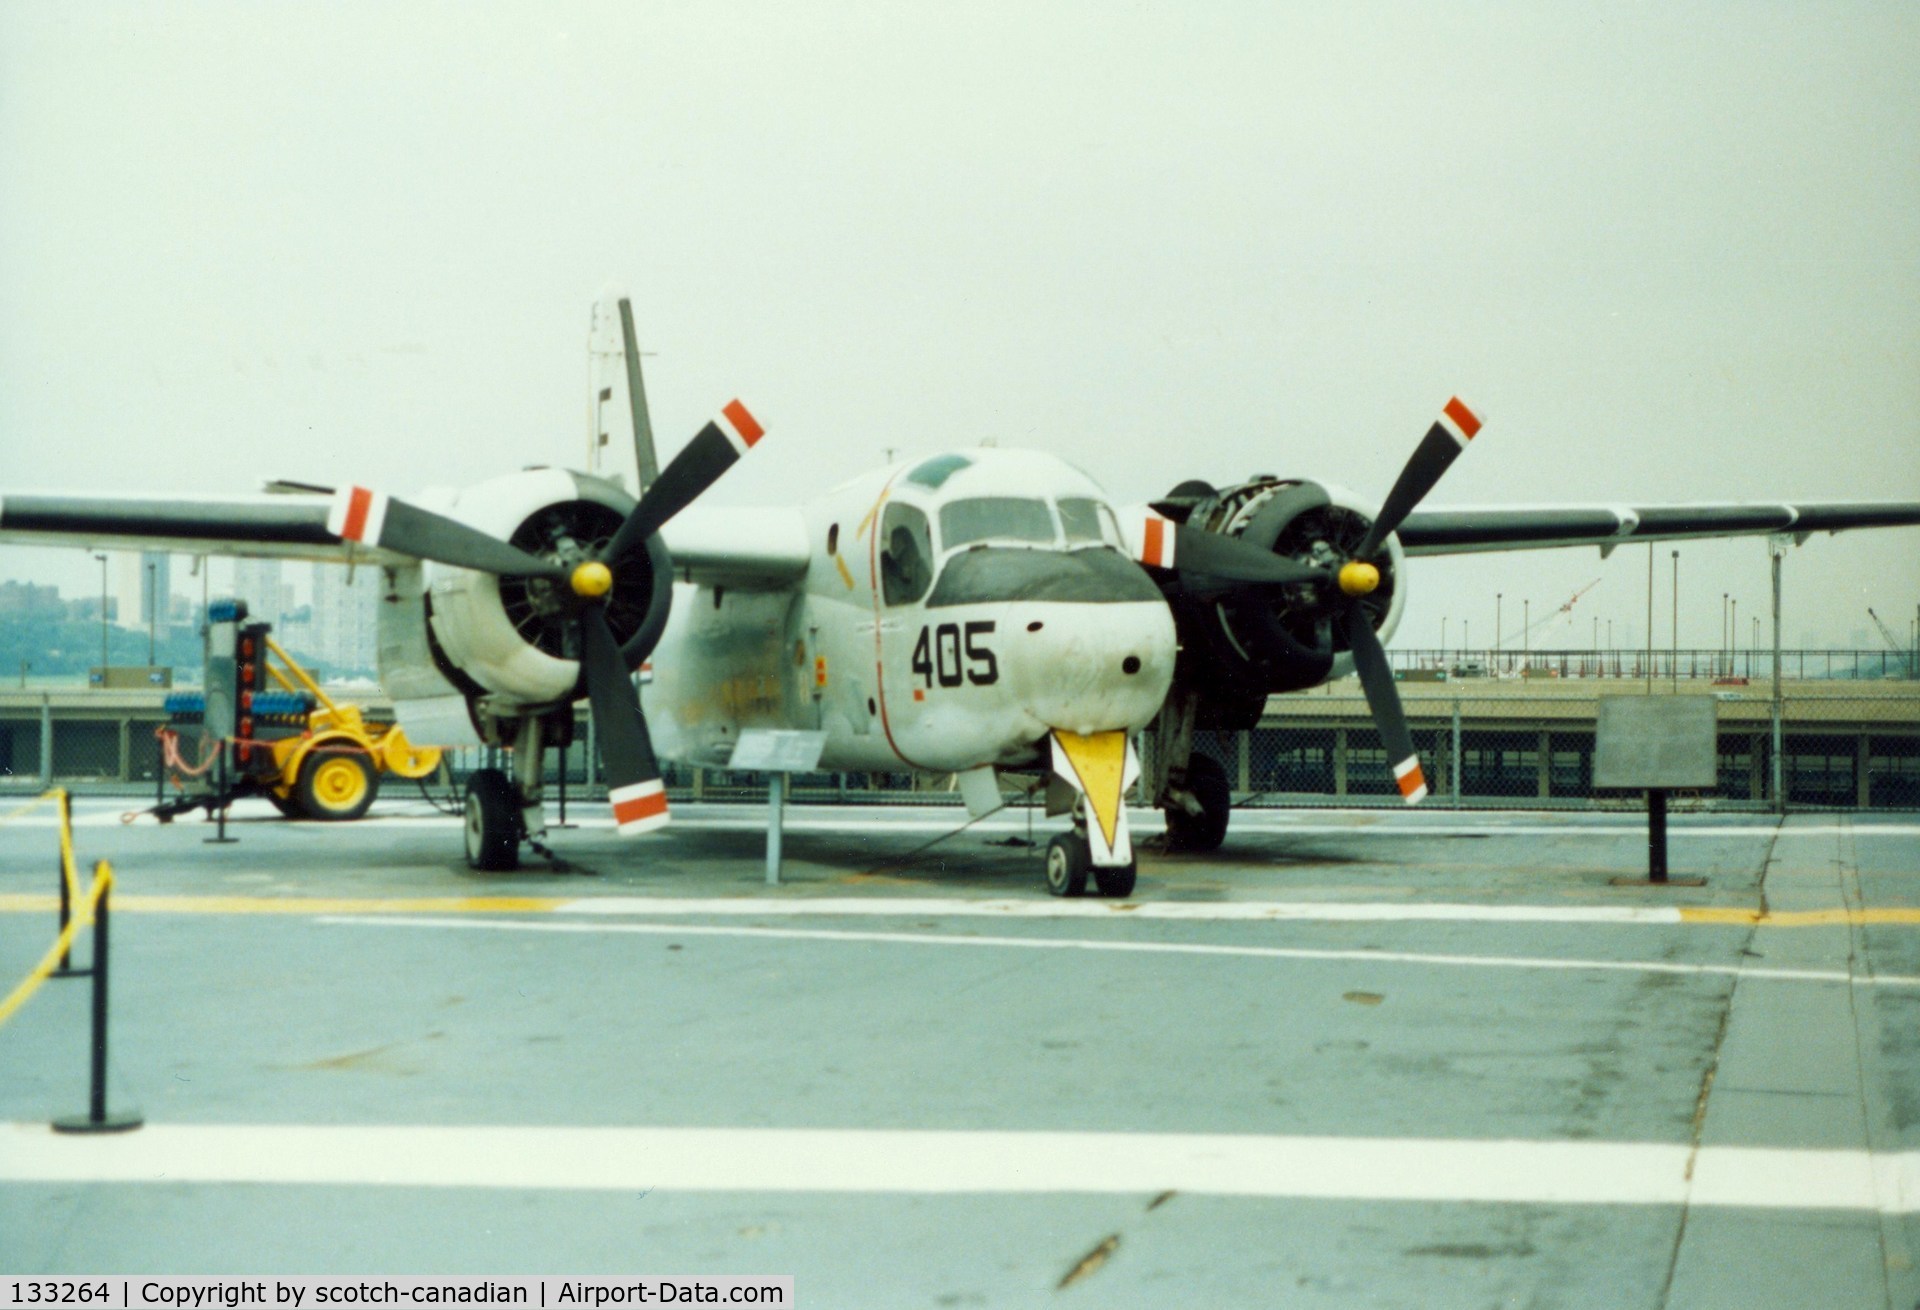 133264, Grumman TS-2A Tracker C/N 235, Grumman TS-2A Tracker S/N 133264 at the Intrepid Sea-Air-Space Museum, New York City, NY - circa early 1990's